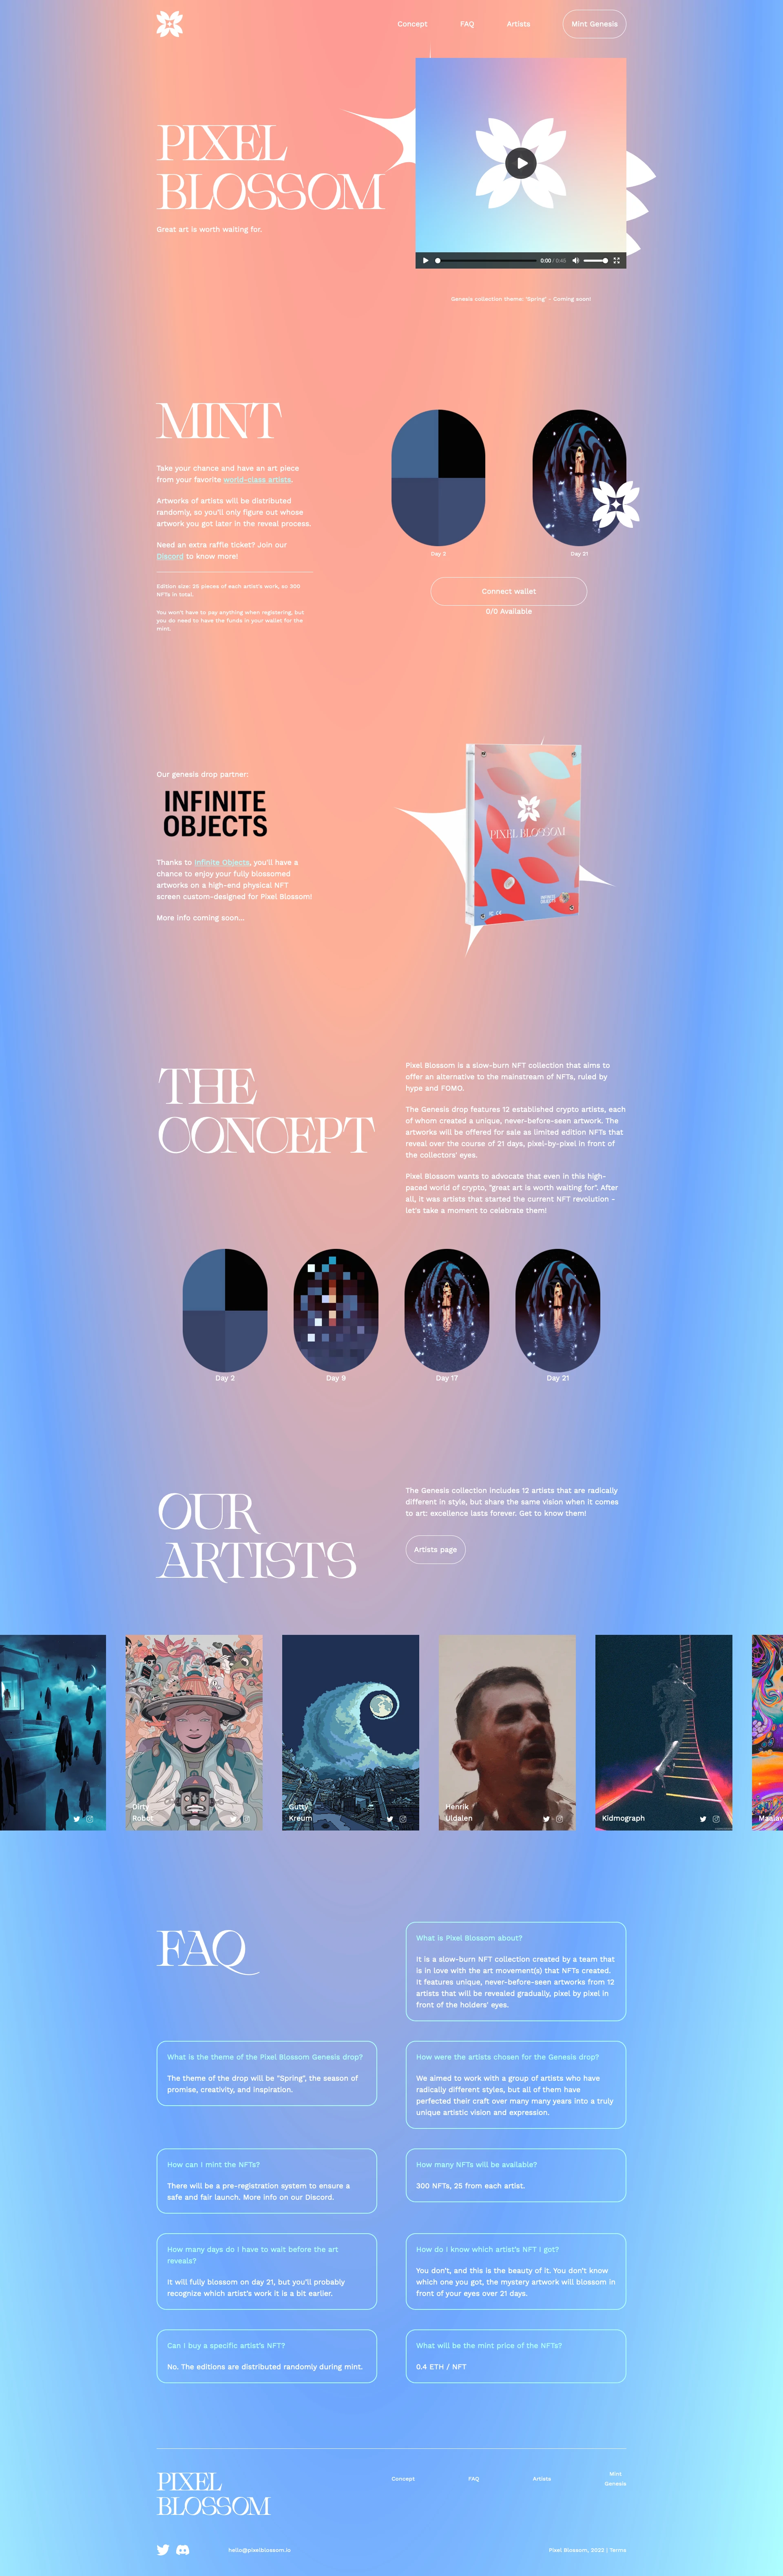 Pixel Blossom Landing Page Example: Pixel Blossom is a slow-burn NFT collection that aims to offer an alternative to the mainstream of NFTs, ruled by hype and FOMO.